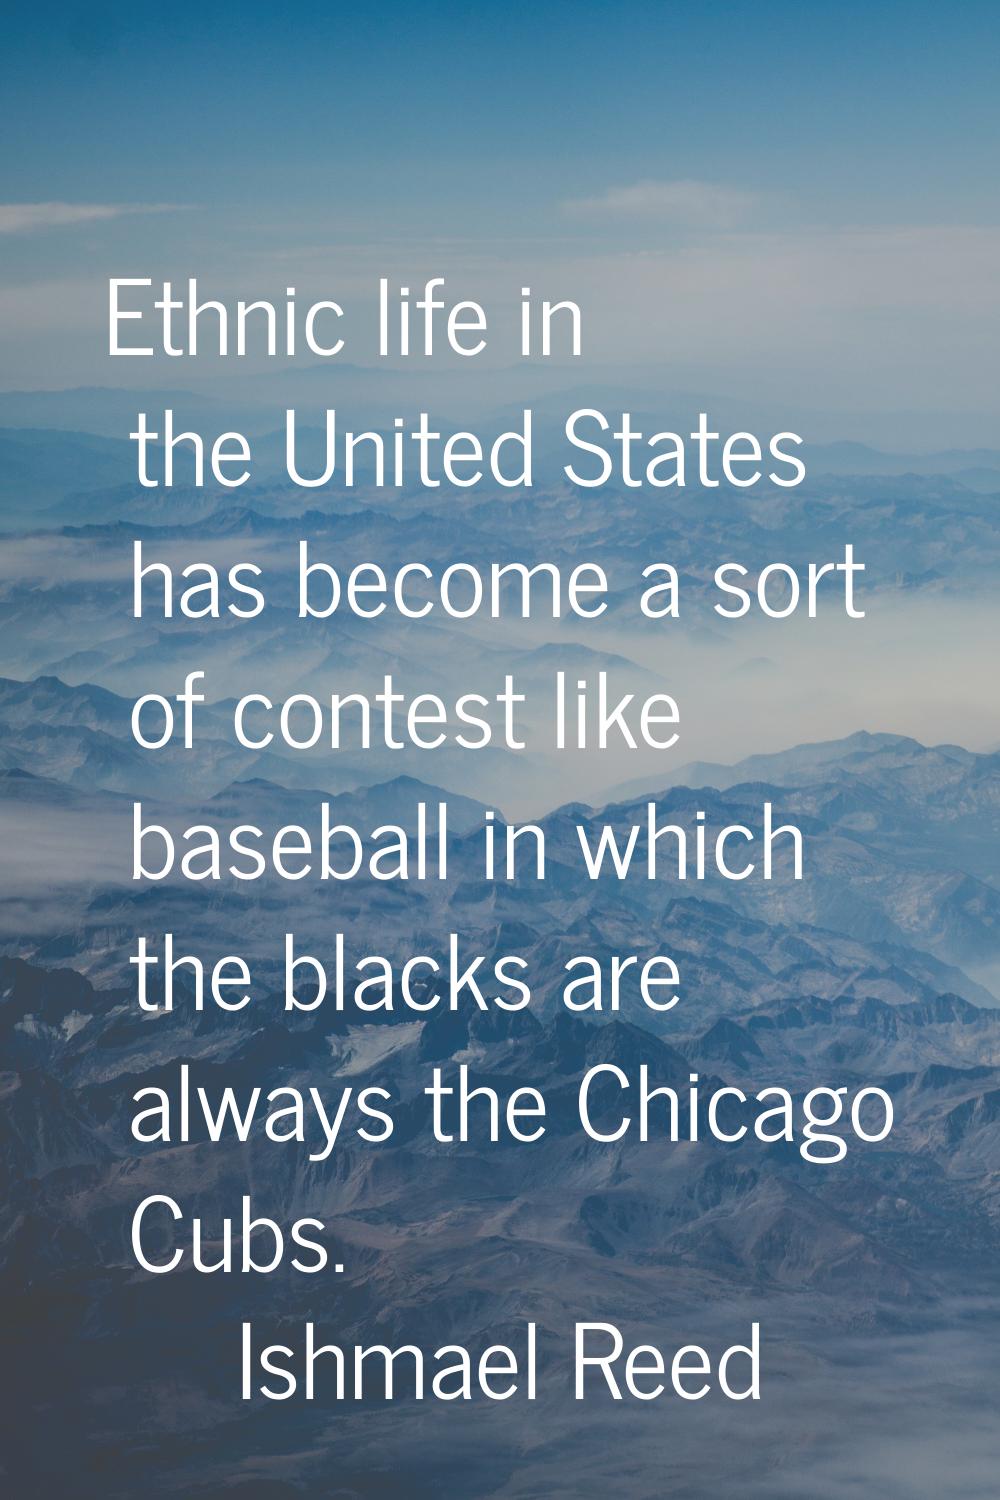 Ethnic life in the United States has become a sort of contest like baseball in which the blacks are